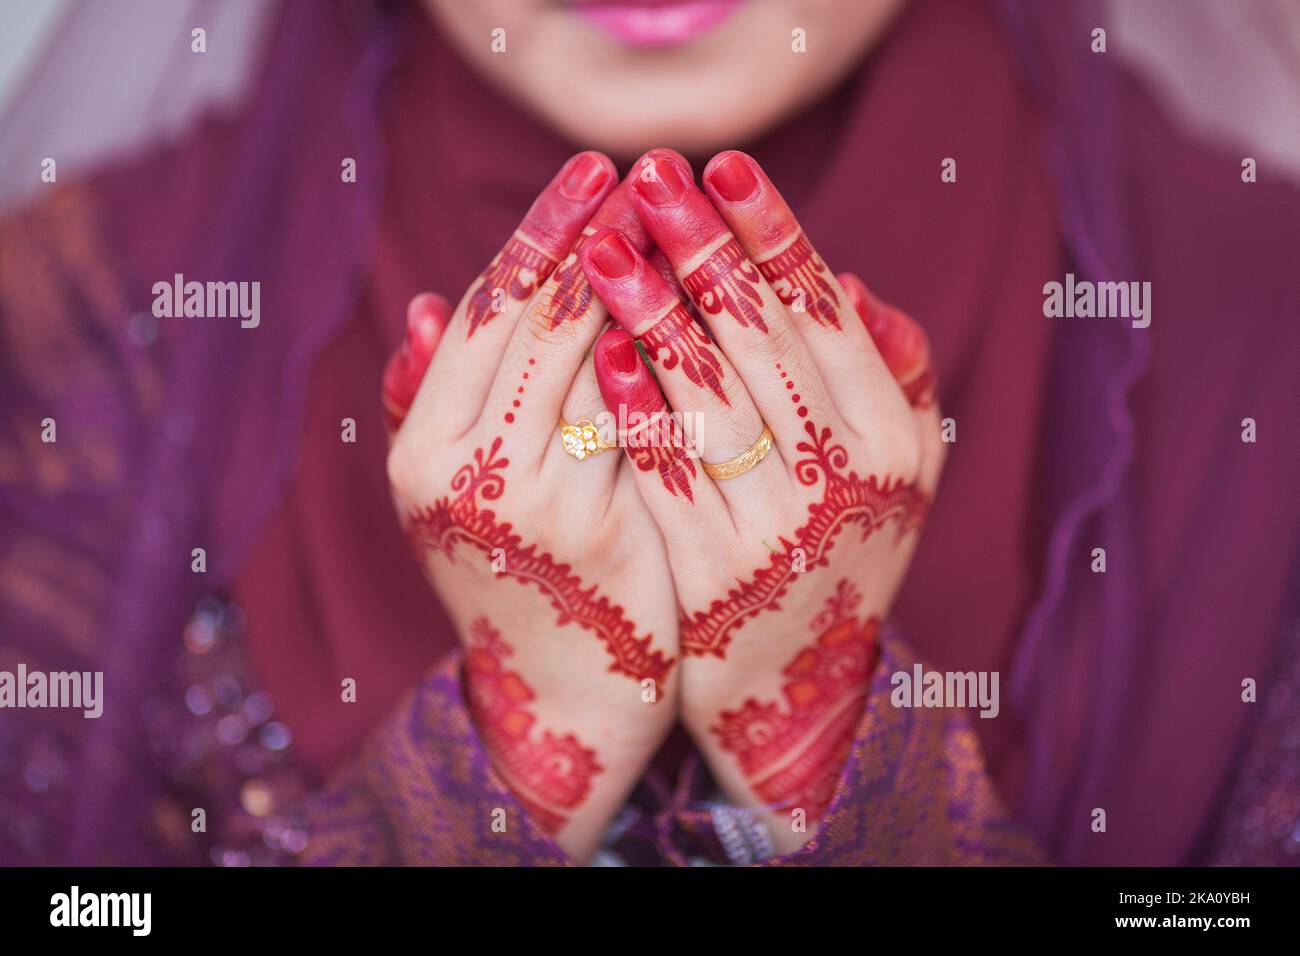 Henna and wedding ring on bride hand, pray for doa session Stock Photo